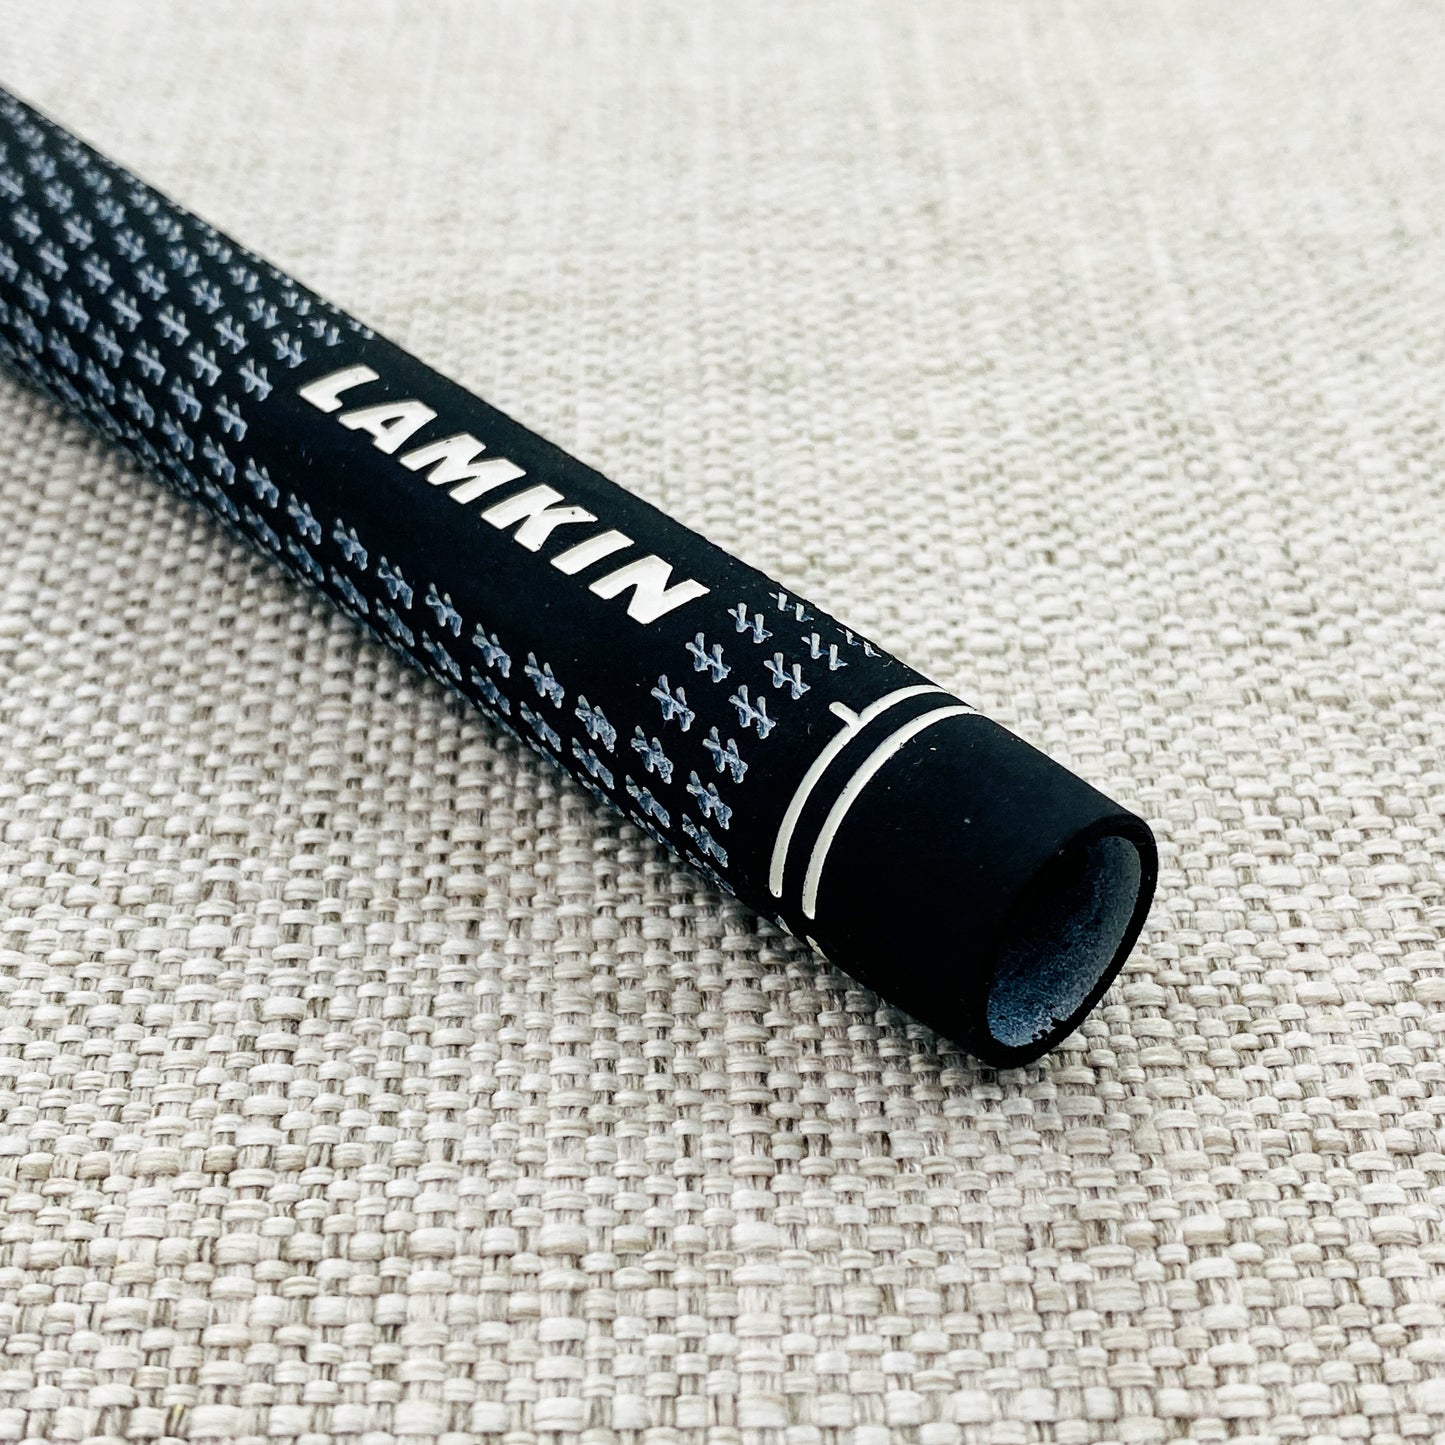 Lamkin Crossline swing grip. Choice of size. Black/White - Price includes fitment.